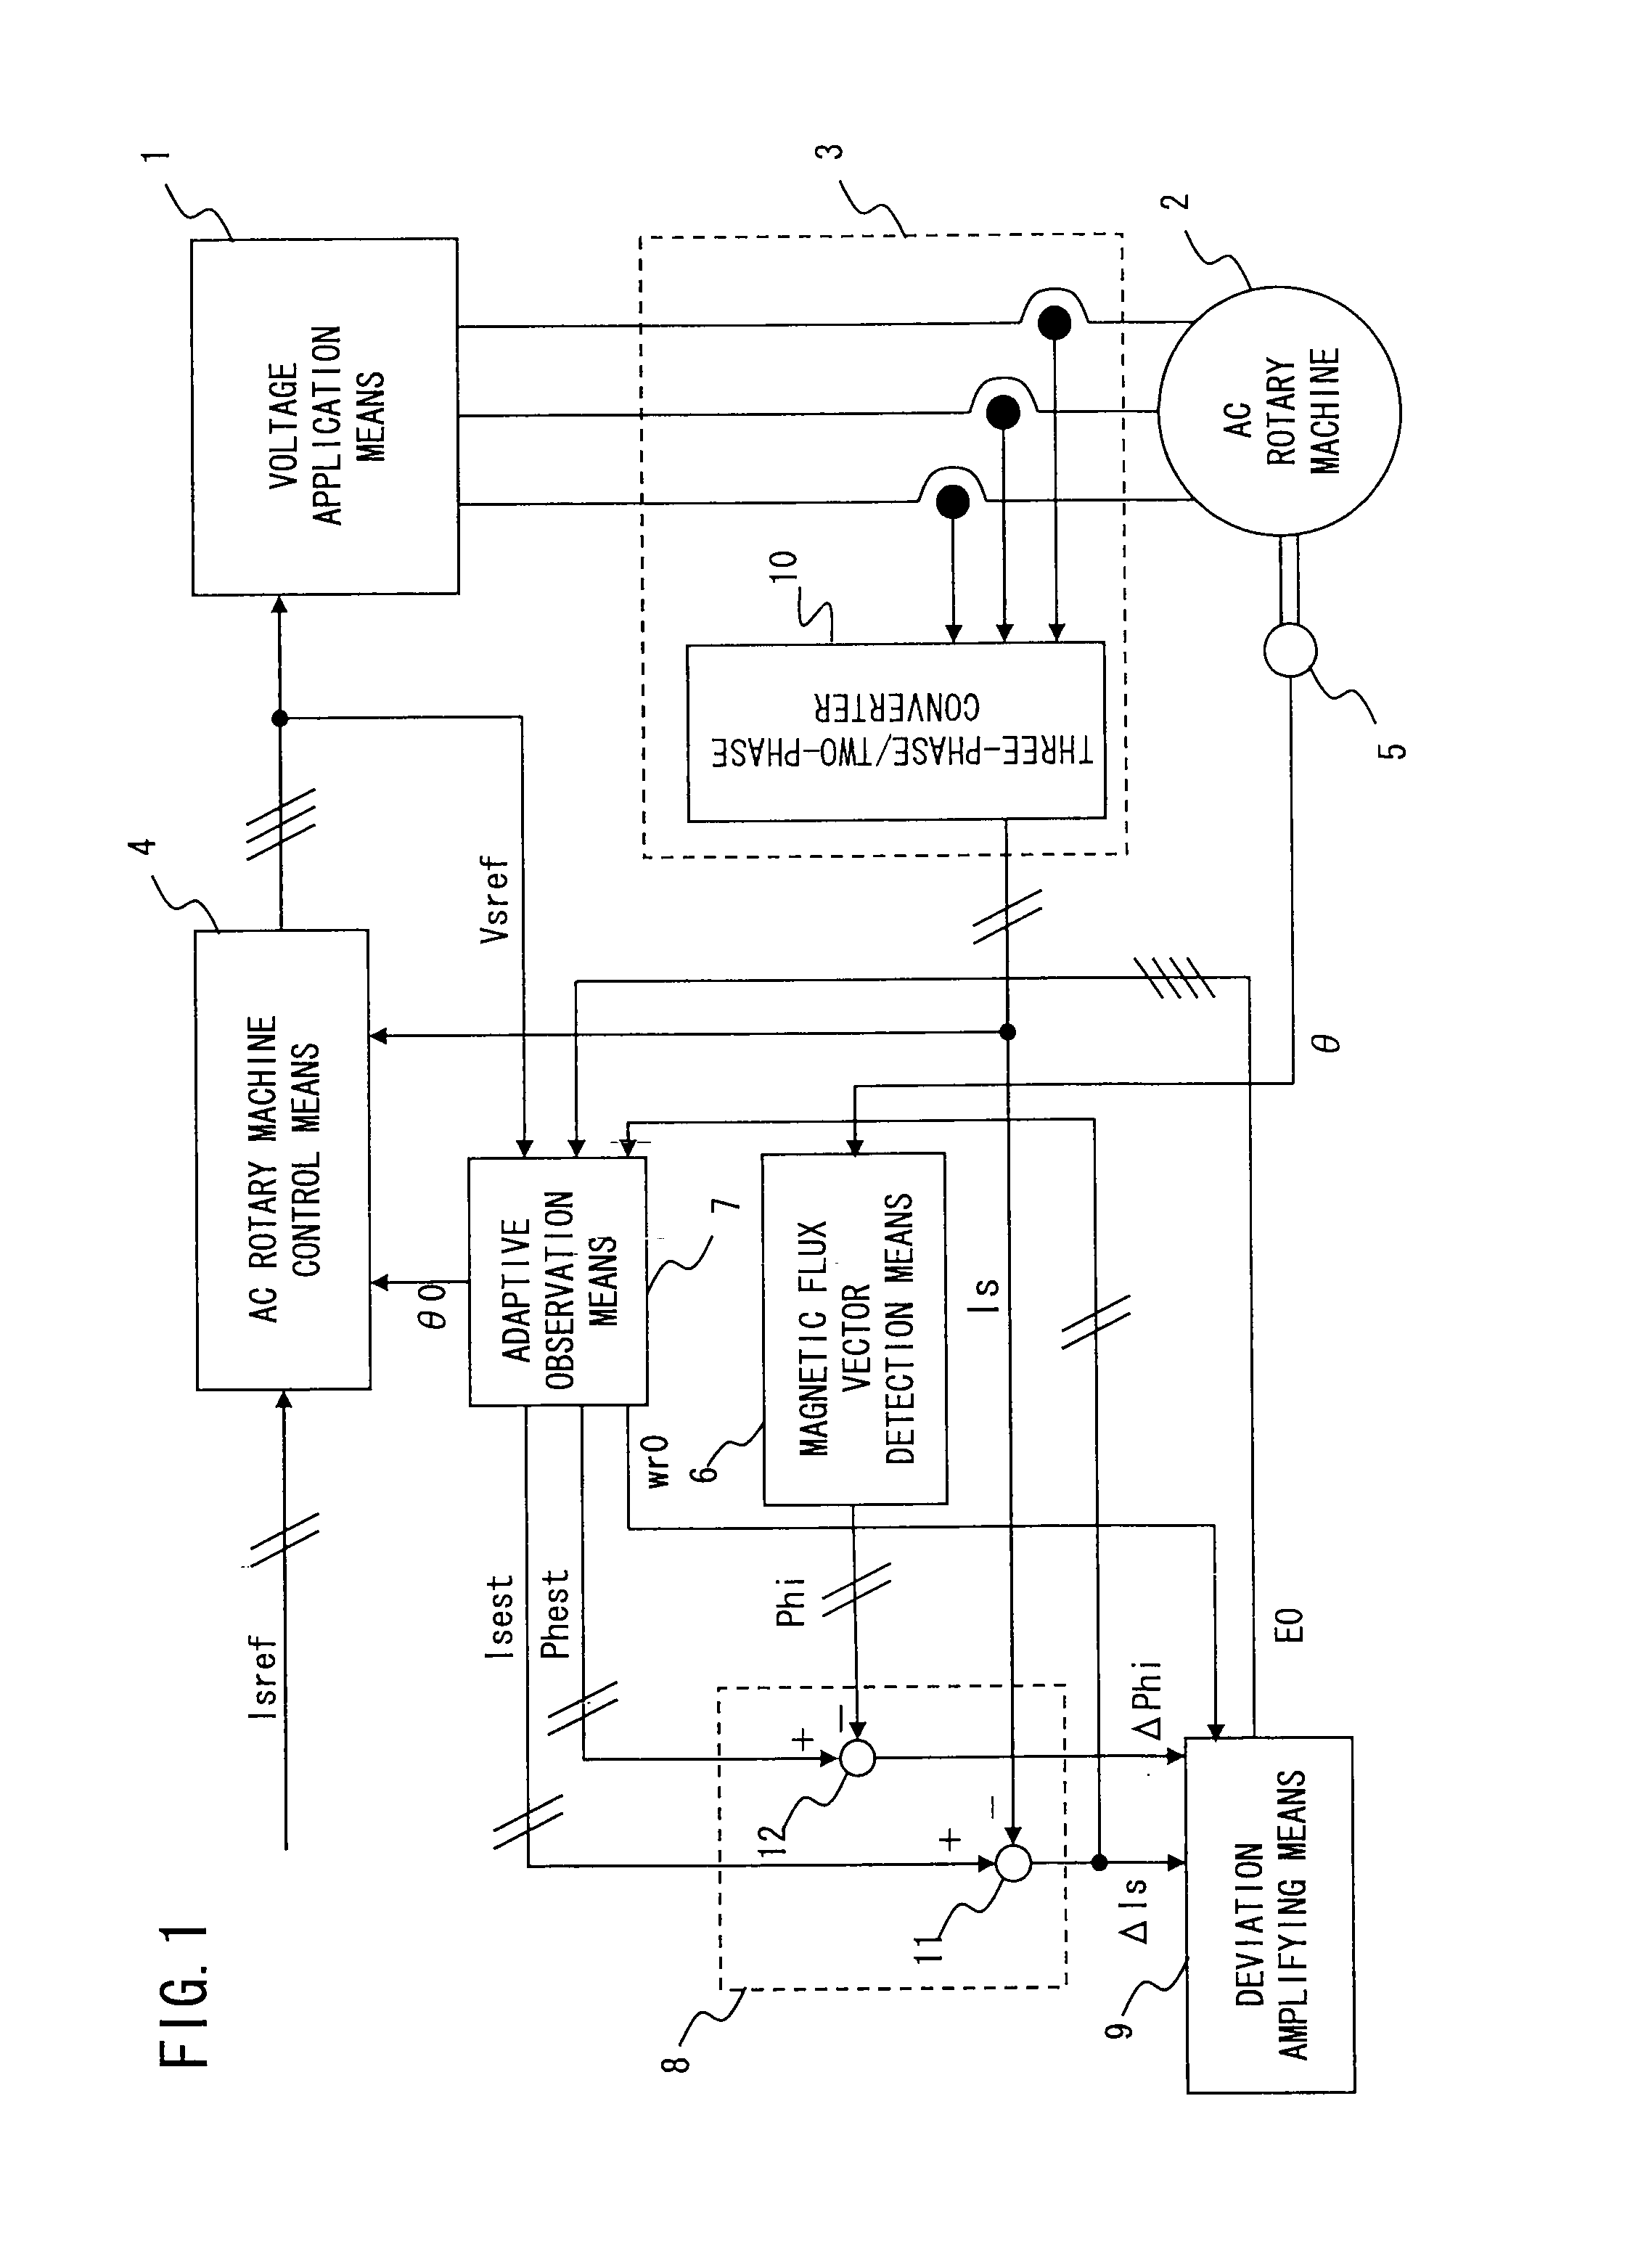 Controller for ac rotary machine